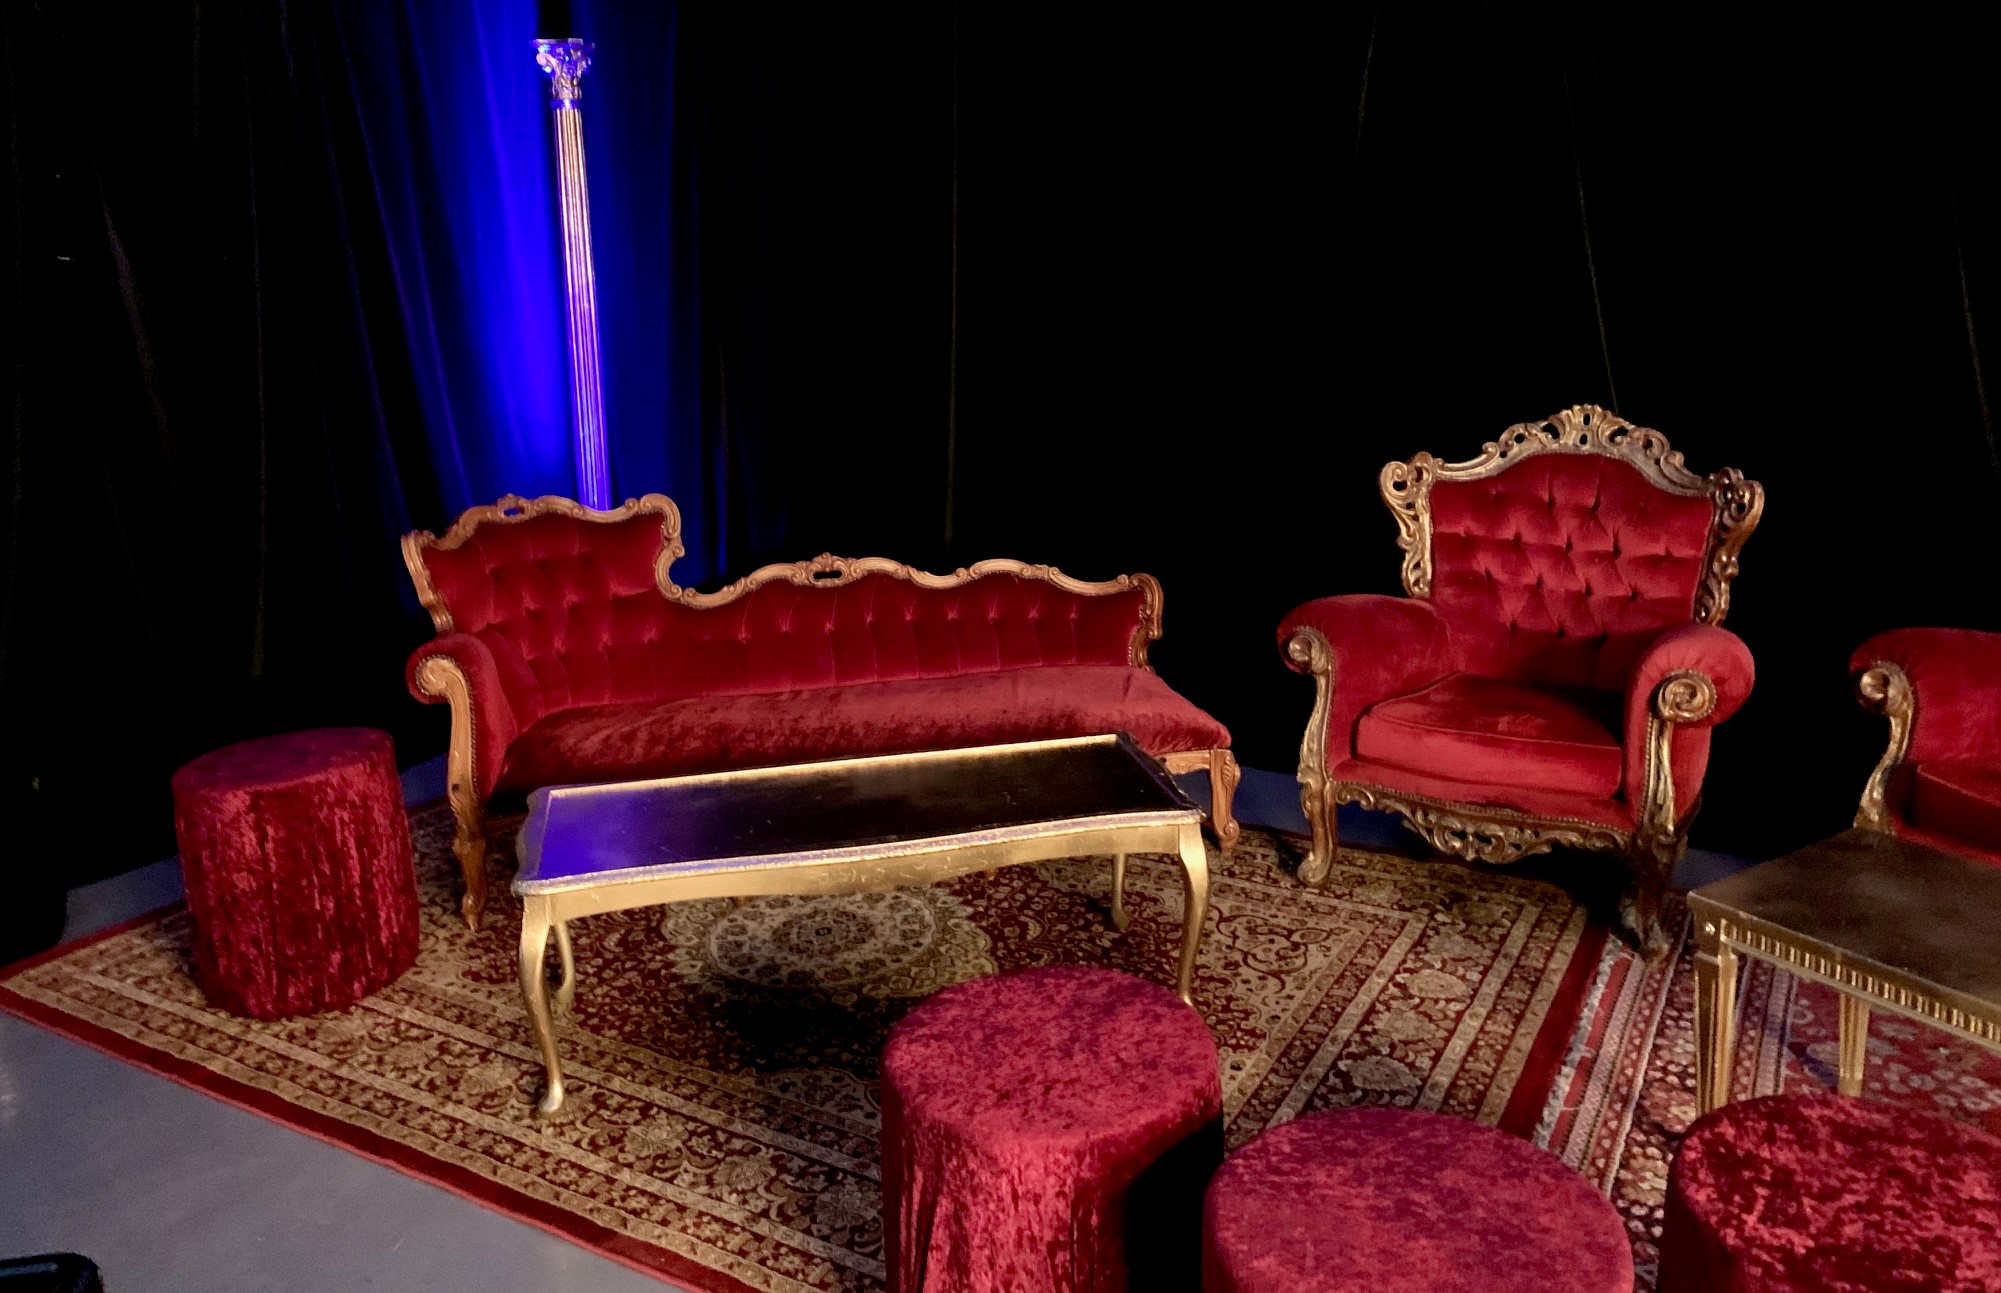 Ornate Chaise Lounge - Prop For Hire